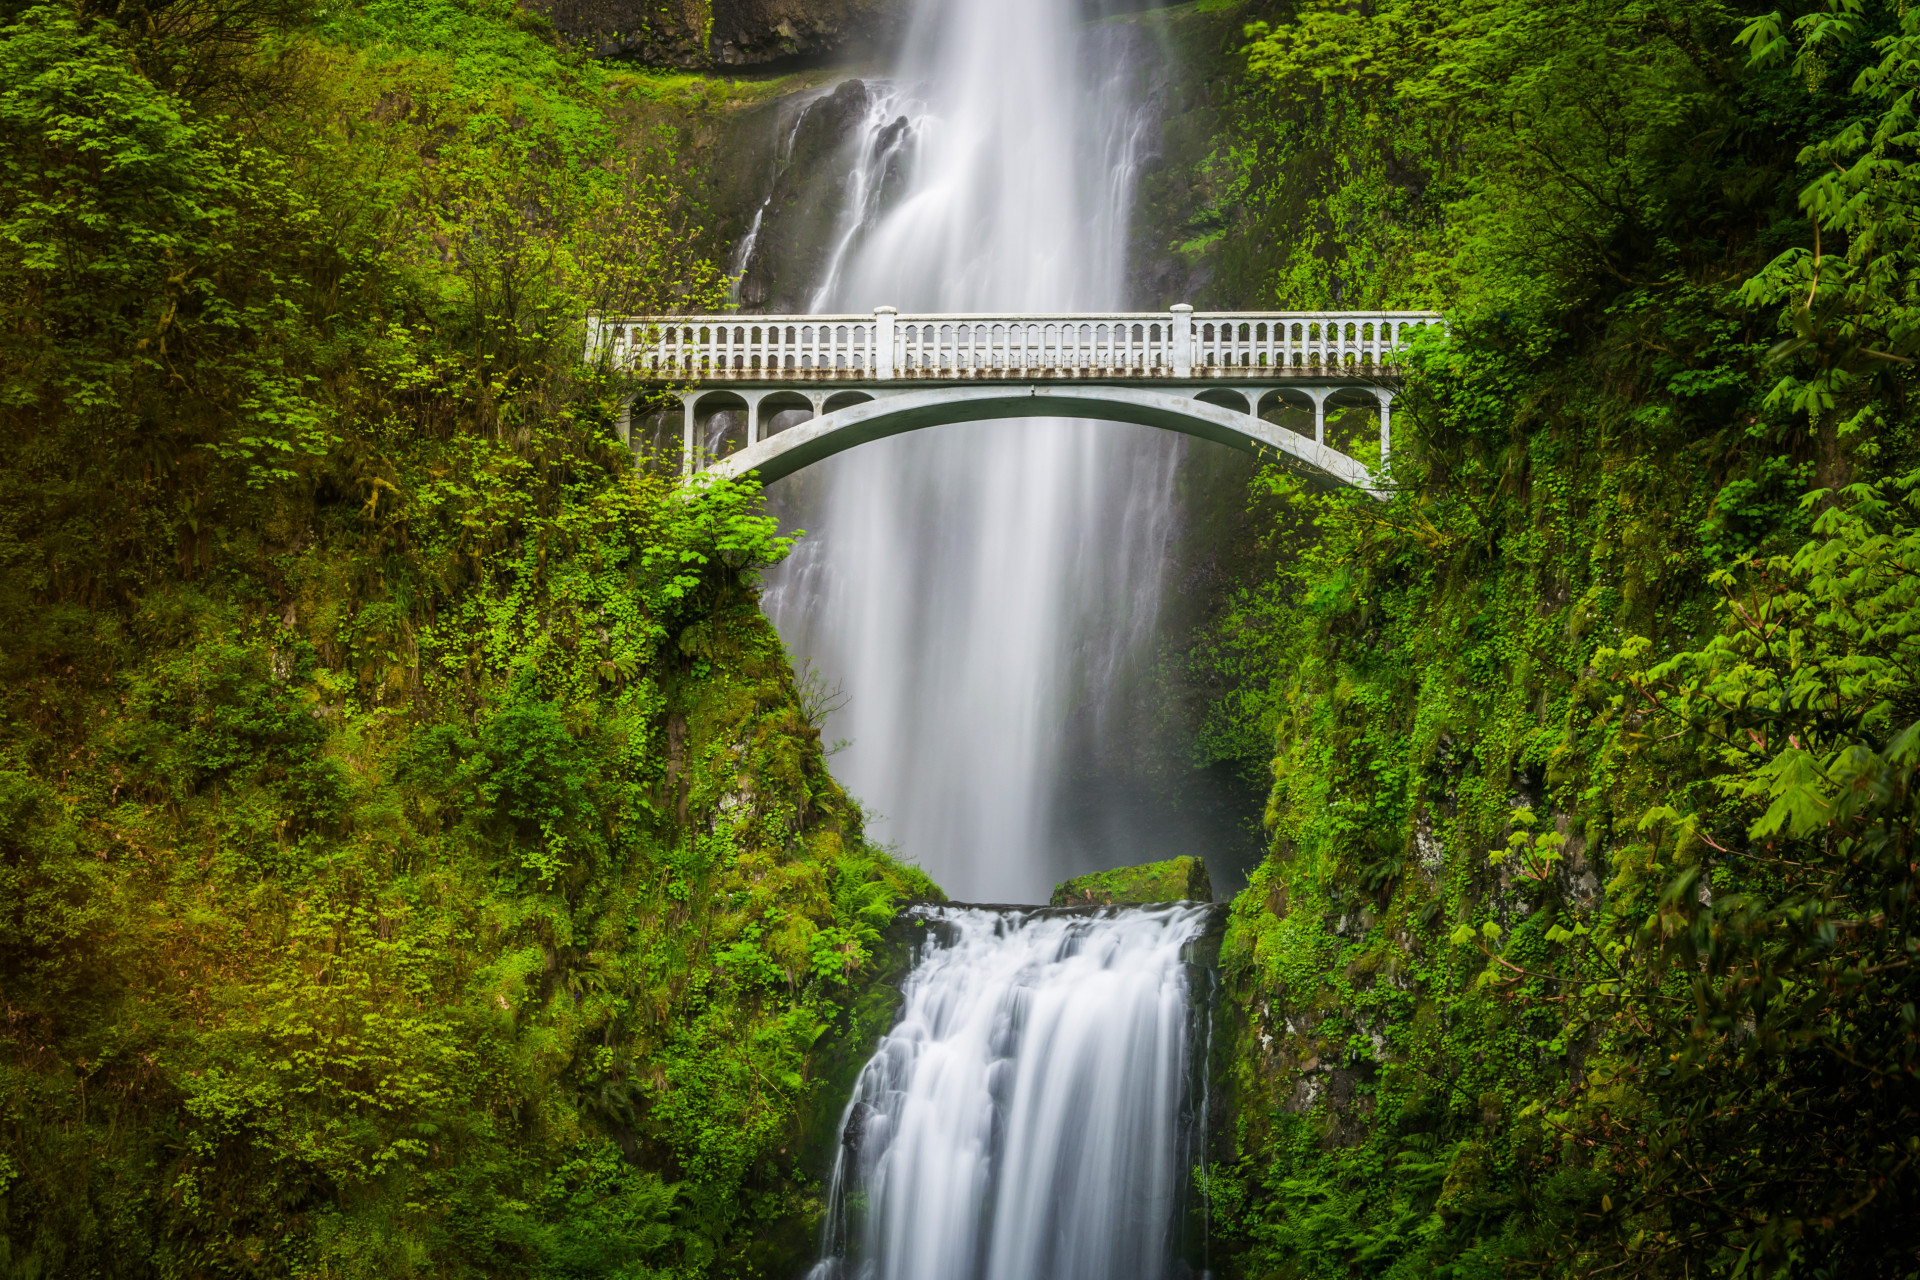 <p>Nestled between two basalt rocks draped in a layer of luminous green moss is the  Historic Columbia River Highway, which looks quite possibly like the motorway to heaven. If you want to discover more idyllic locations in the Pacific Northwest has to offer, click <a href="https://us.starsinsider.com/travel/239670/the-pacific-northwests-most-idyllic-locations">here</a>.</p><p>You may also like:<a href="https://www.starsinsider.com/n/302589?utm_source=msn.com&utm_medium=display&utm_campaign=referral_description&utm_content=247050v5en-us"> Remembering Christopher Plummer, Hollywood's distinguished gentleman</a></p>